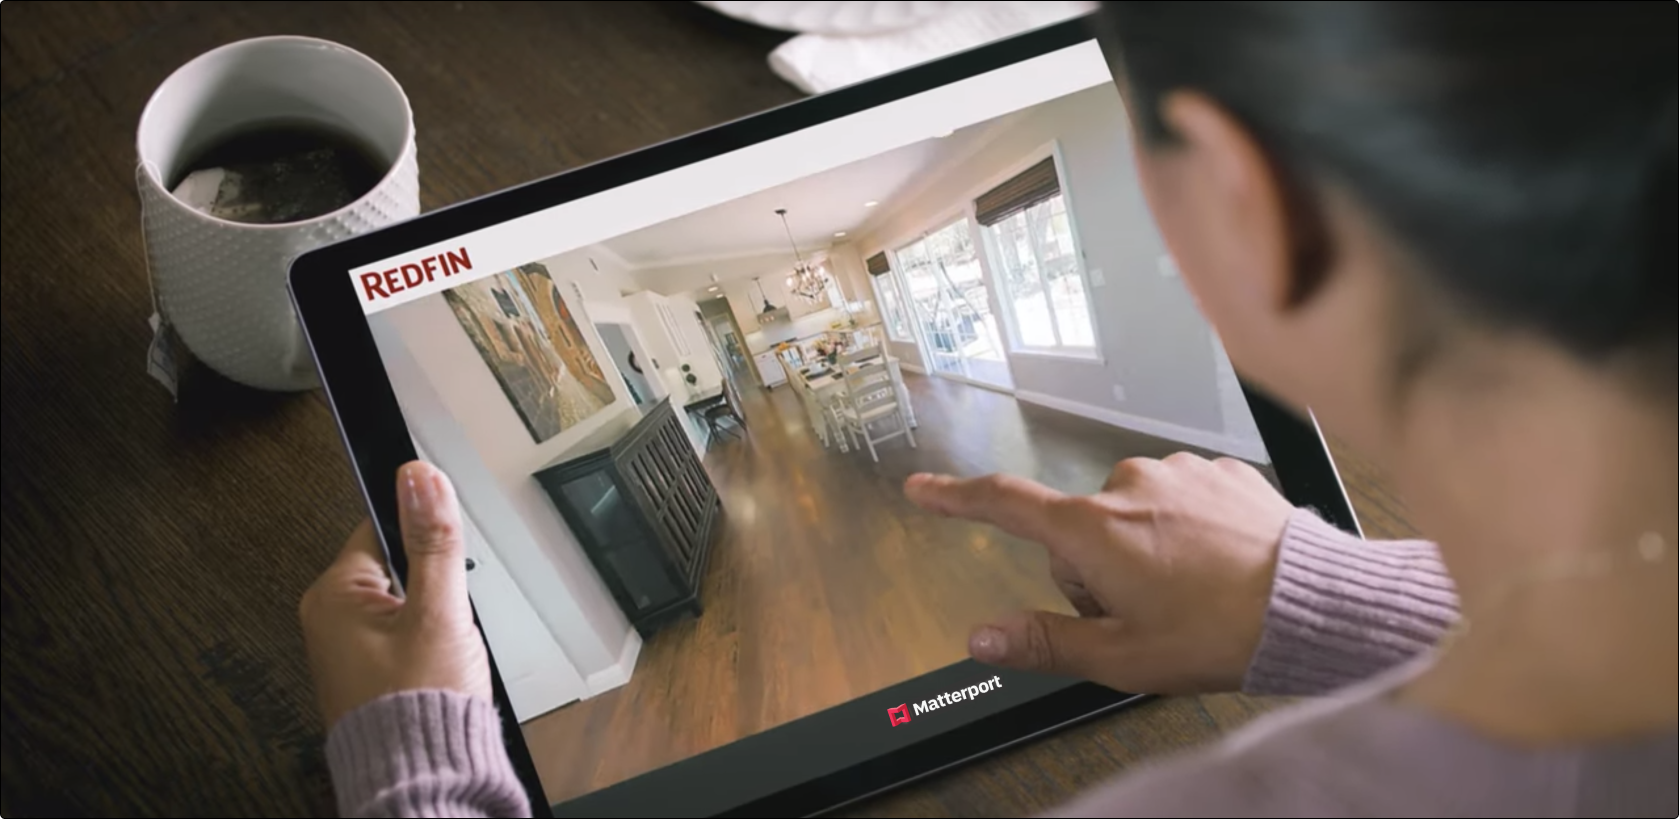 A Matterport real estate tour shown on Redfin